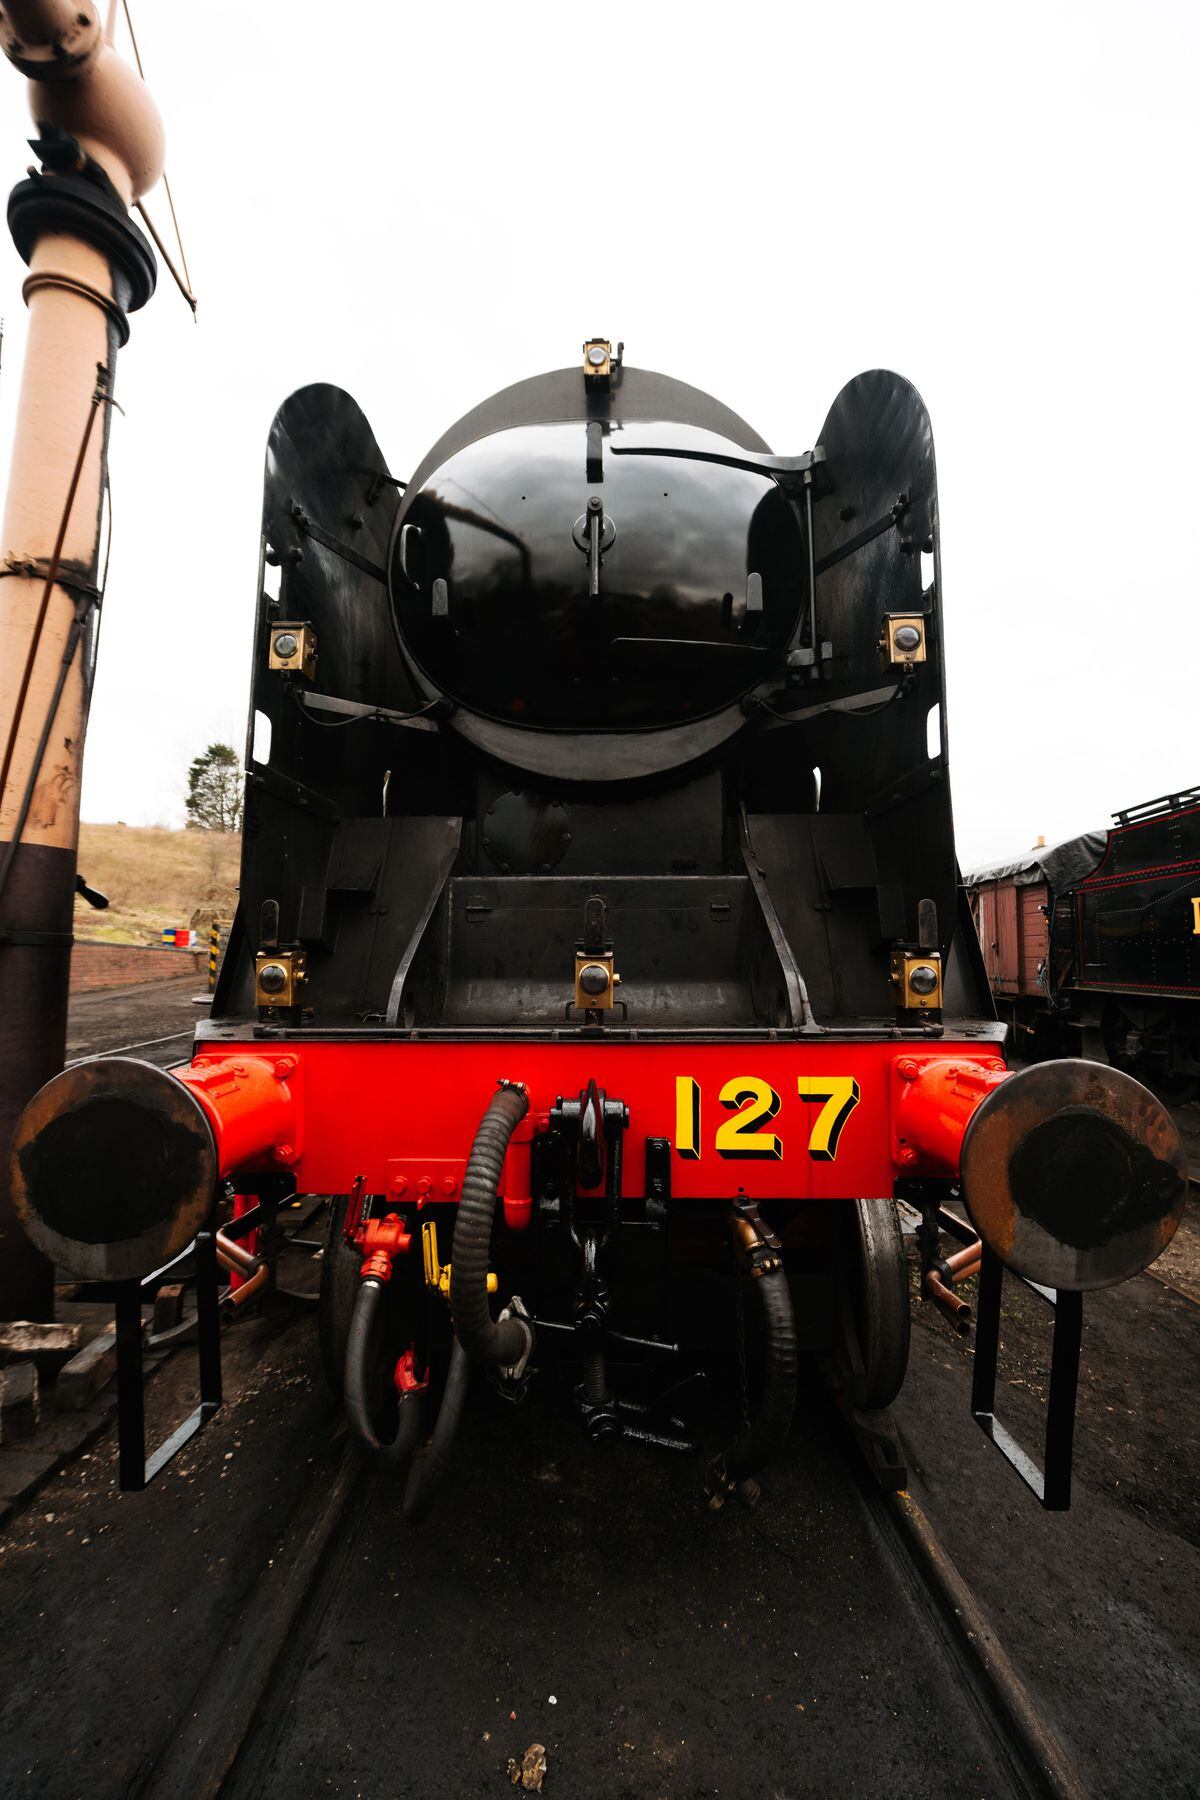 The engine was officially unveiled on the Severn Valley Railway's Facebook page on Monday